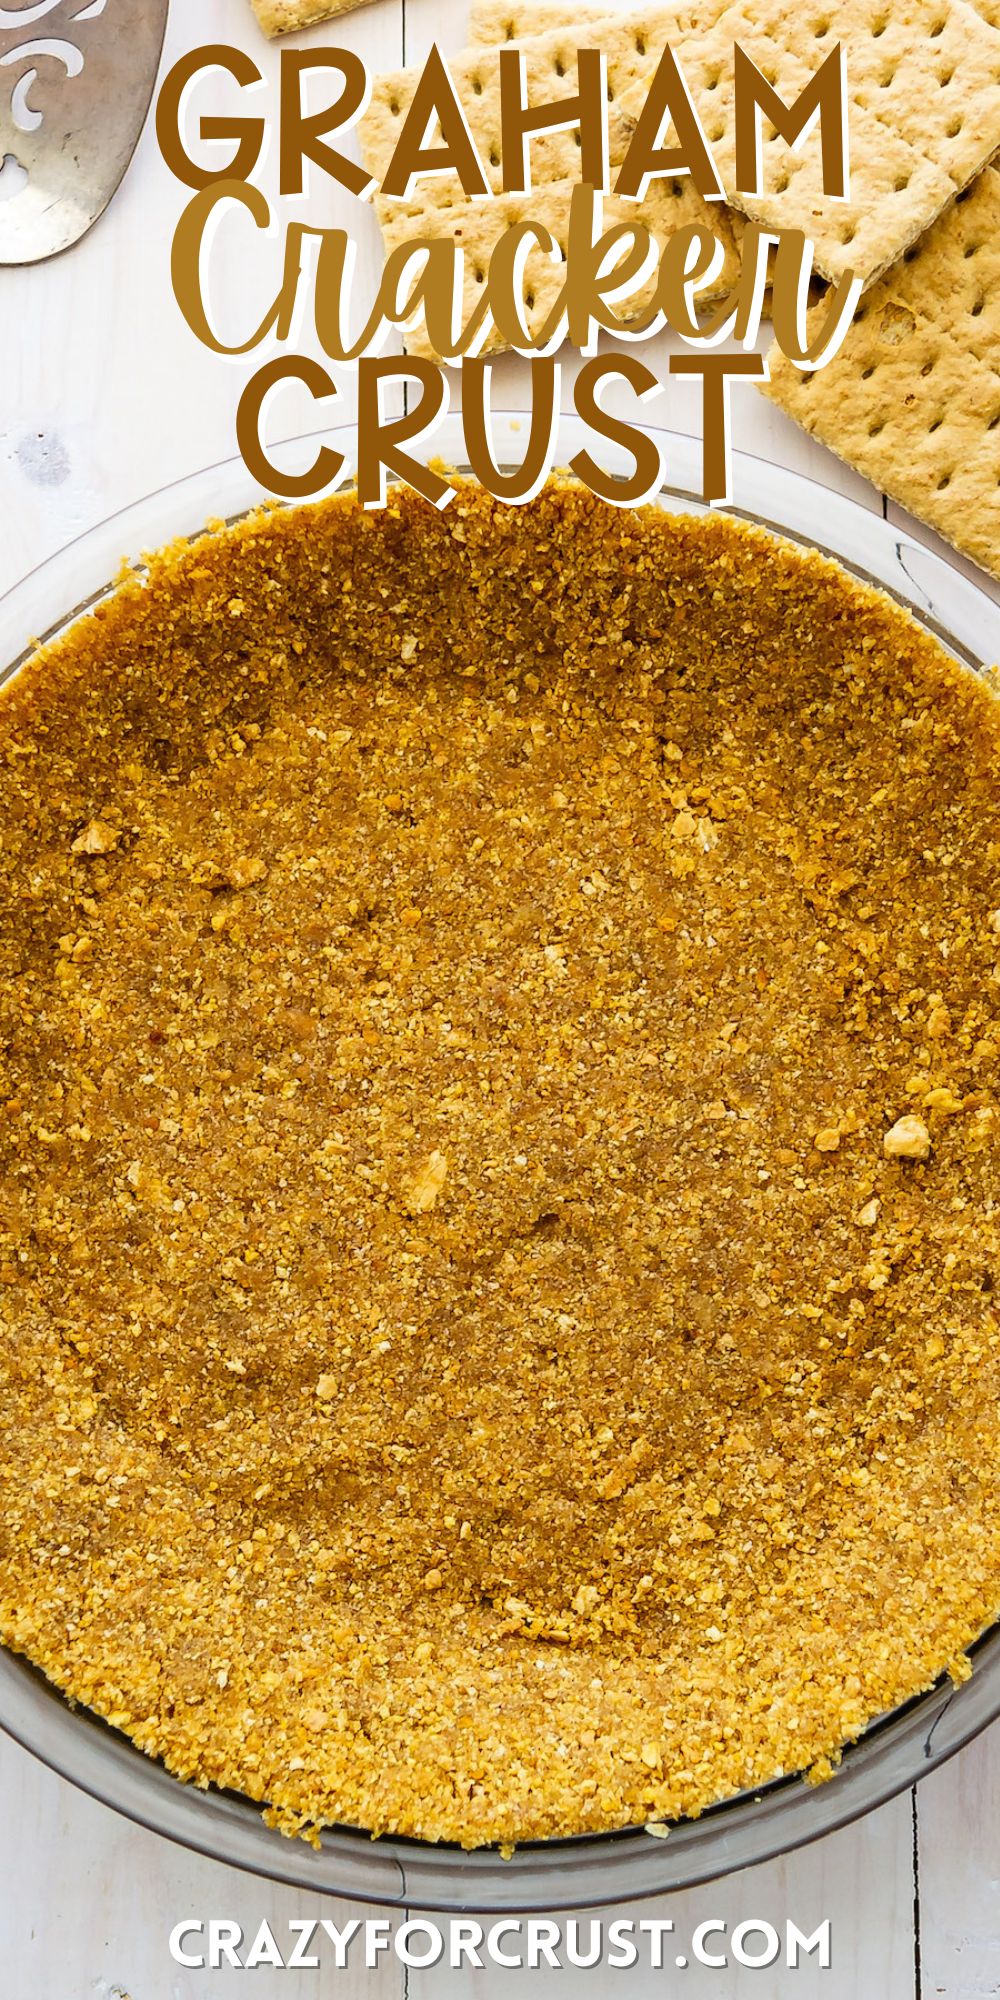 graham cracker crust in a clear pie container with words on the image.